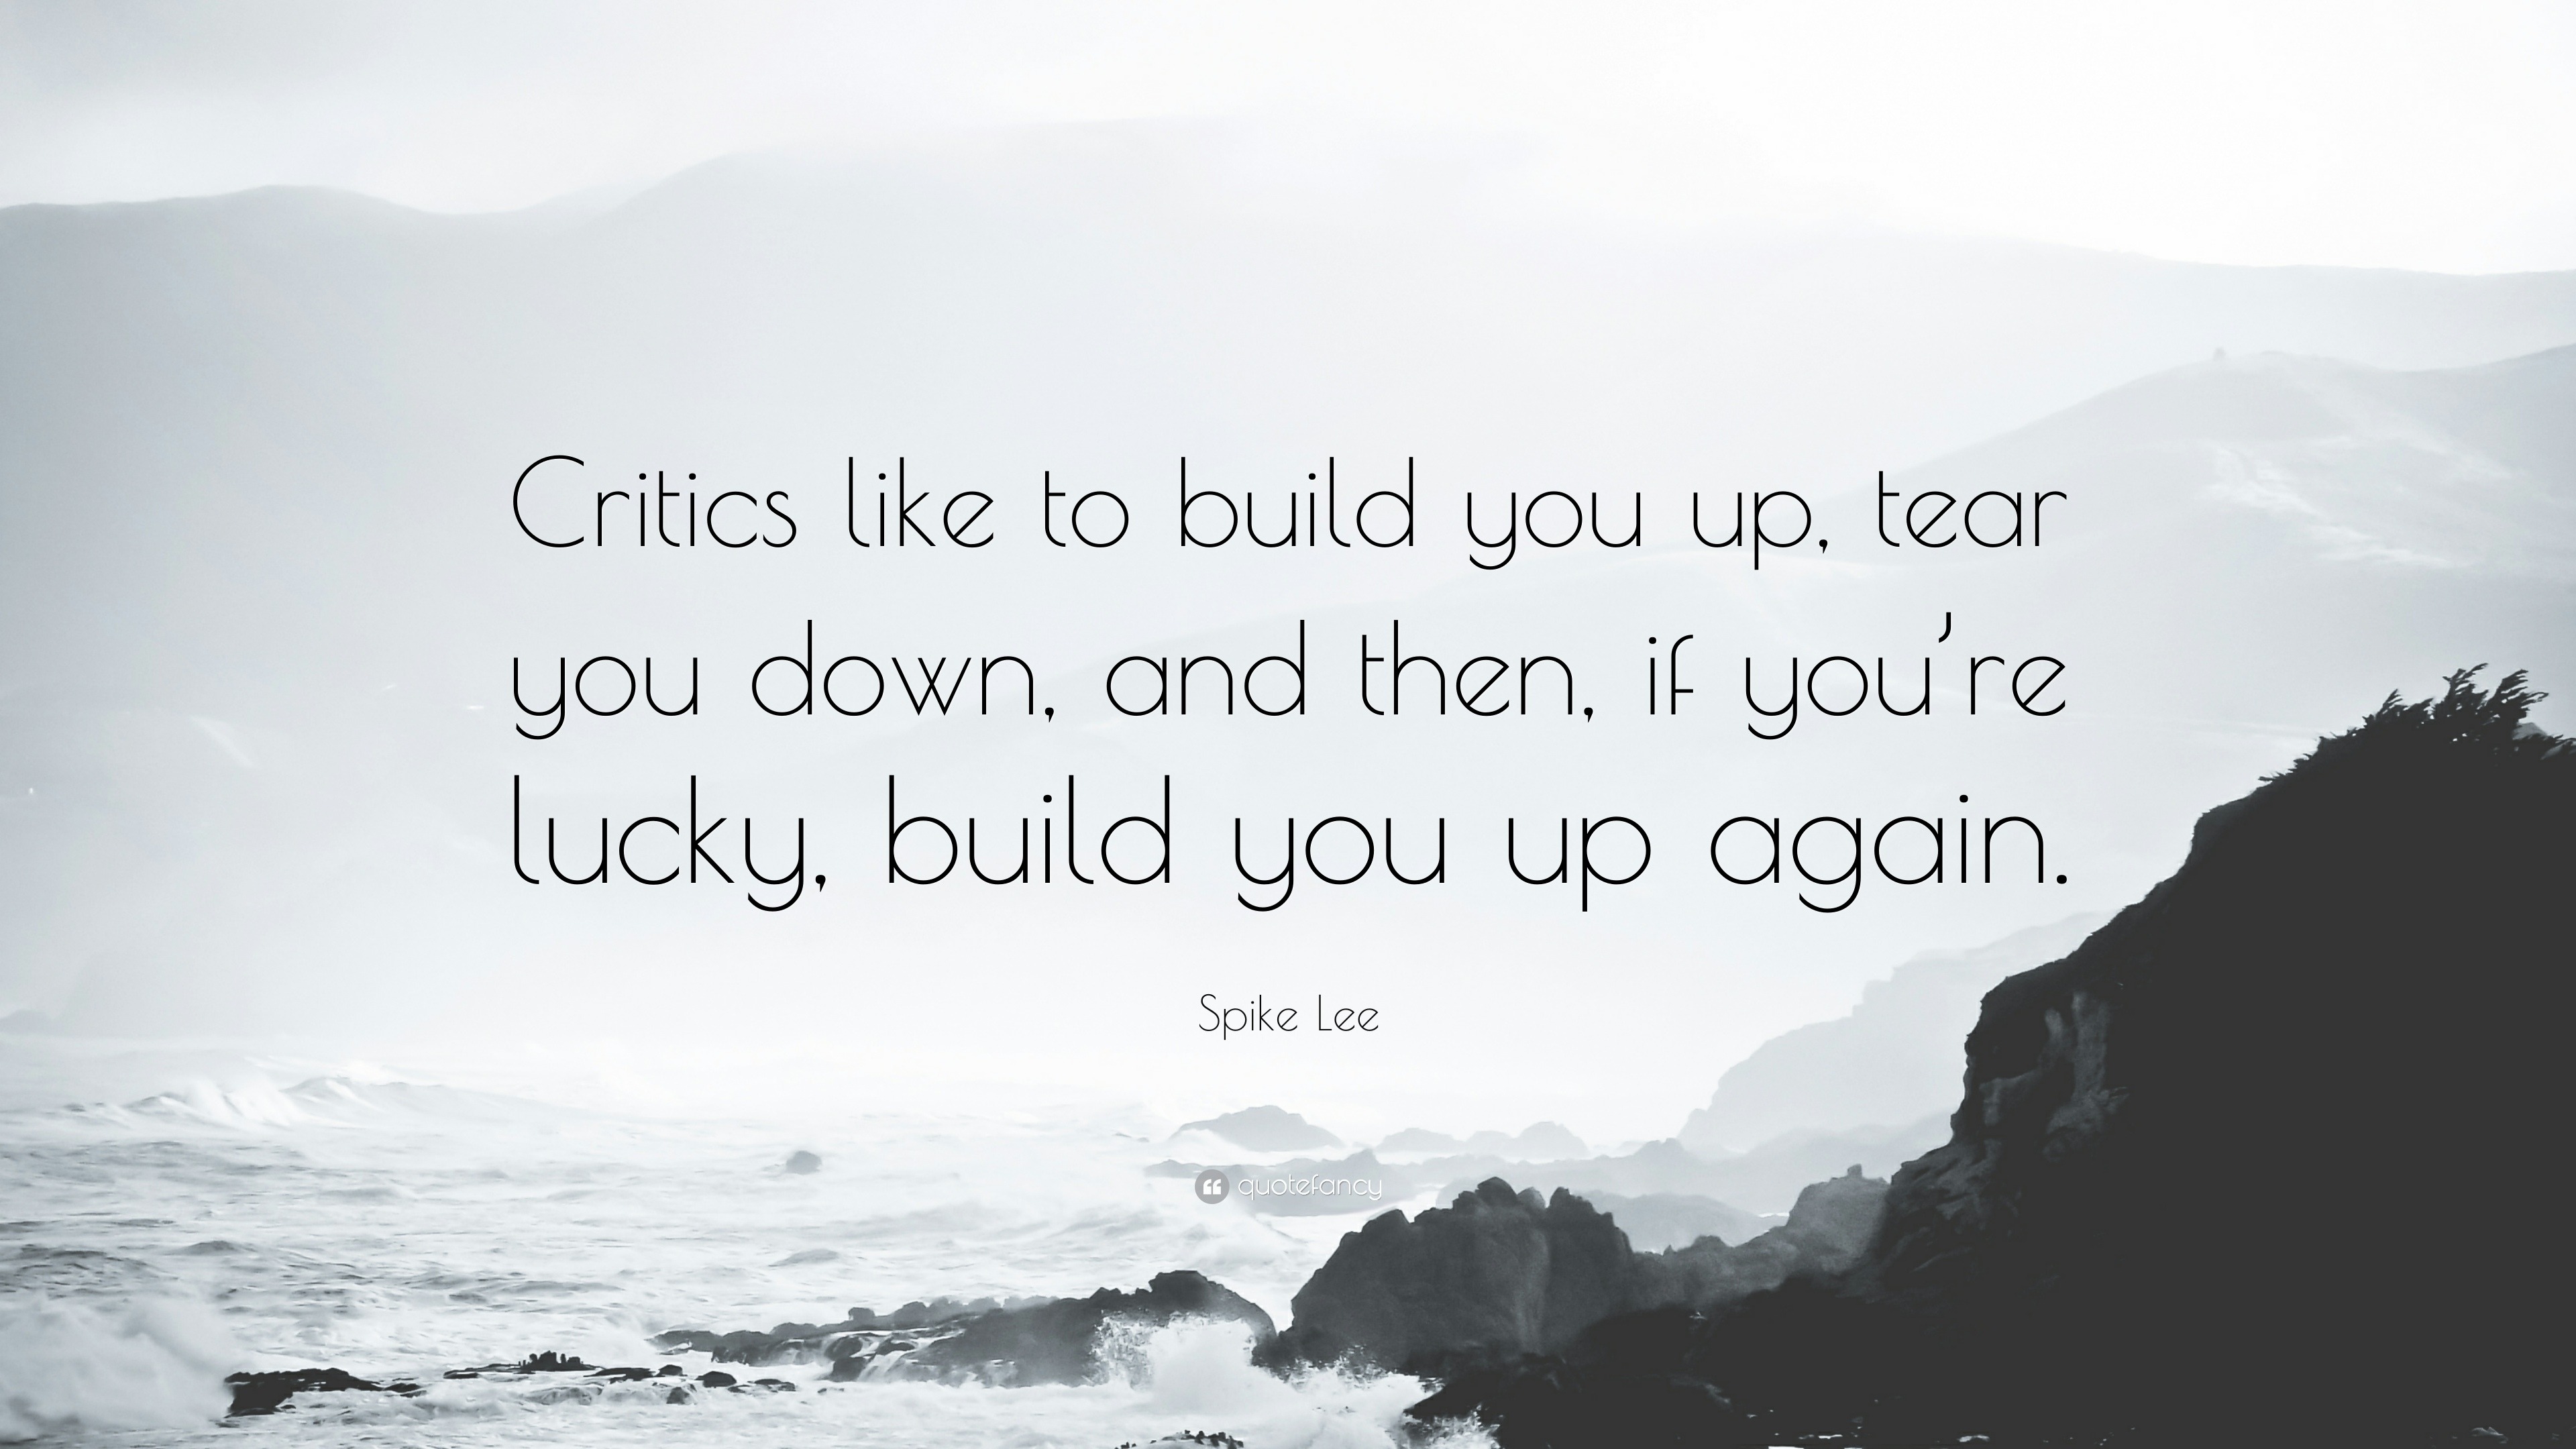 Spike Lee Quote: “Critics like to build you up, tear you down, and